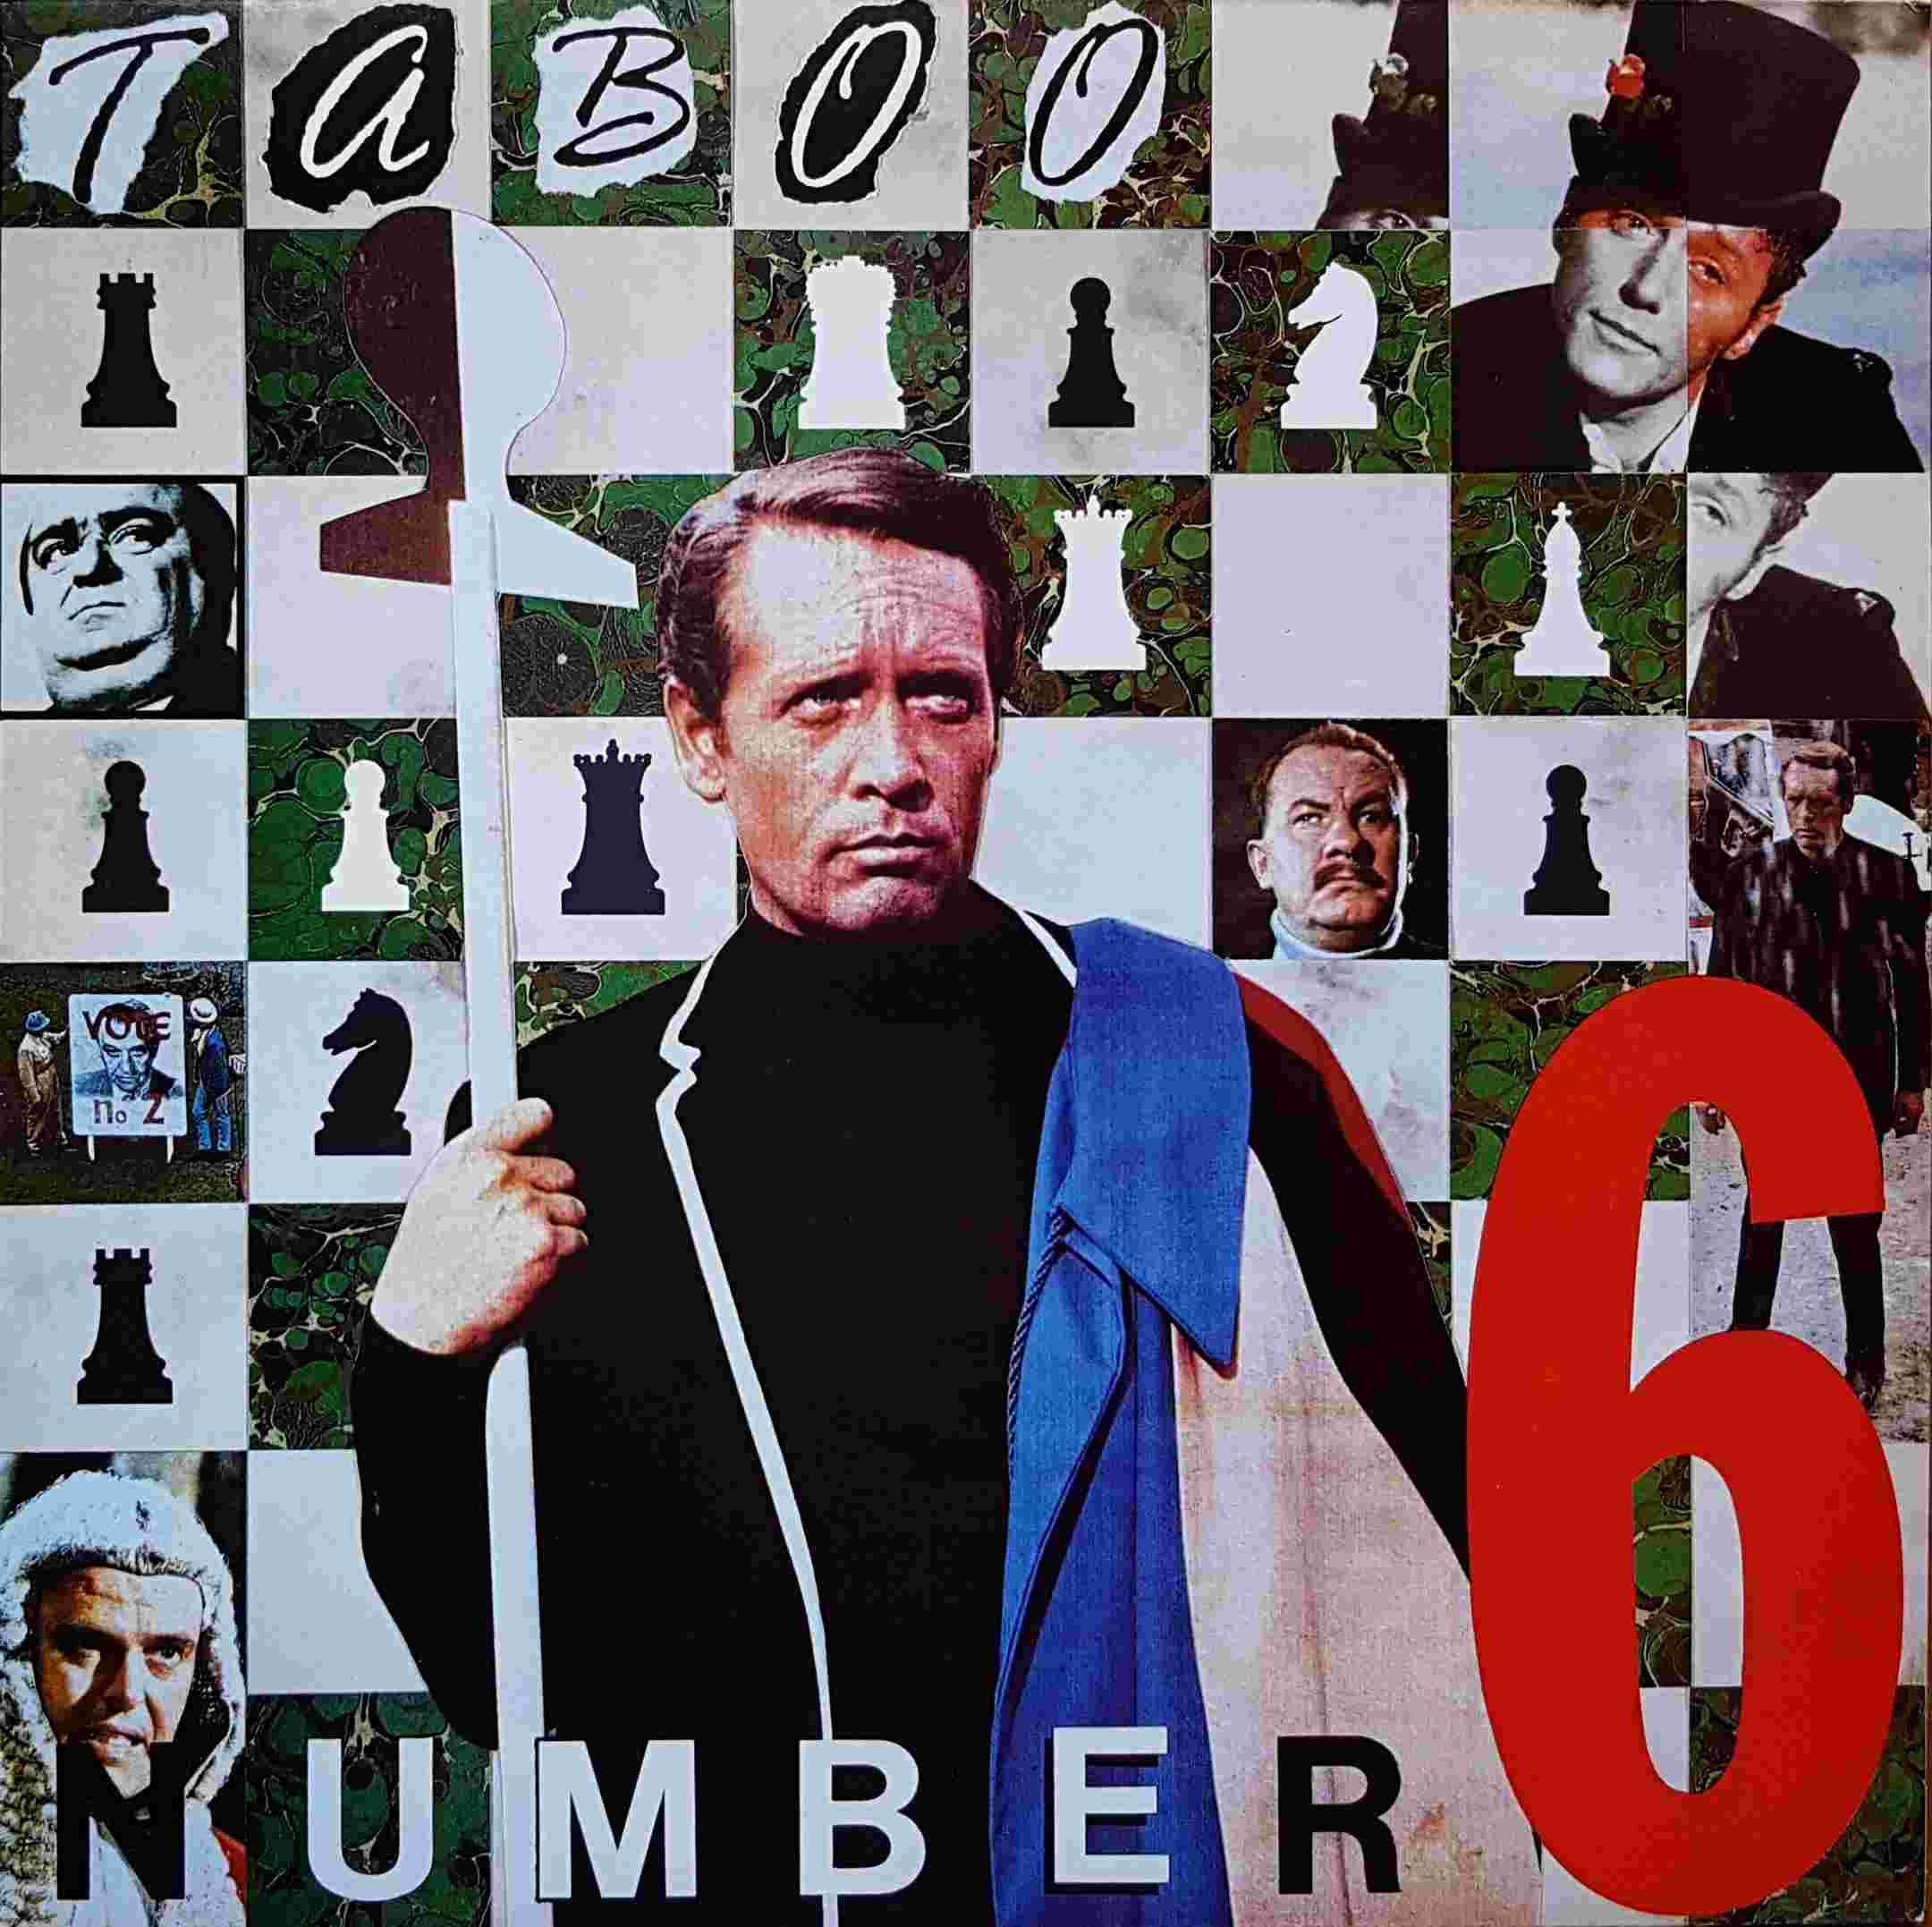 Picture of 12 ANA 44 Number 6 (The prisoner) by artist Taboo from ITV, Channel 4 and Channel 5 library